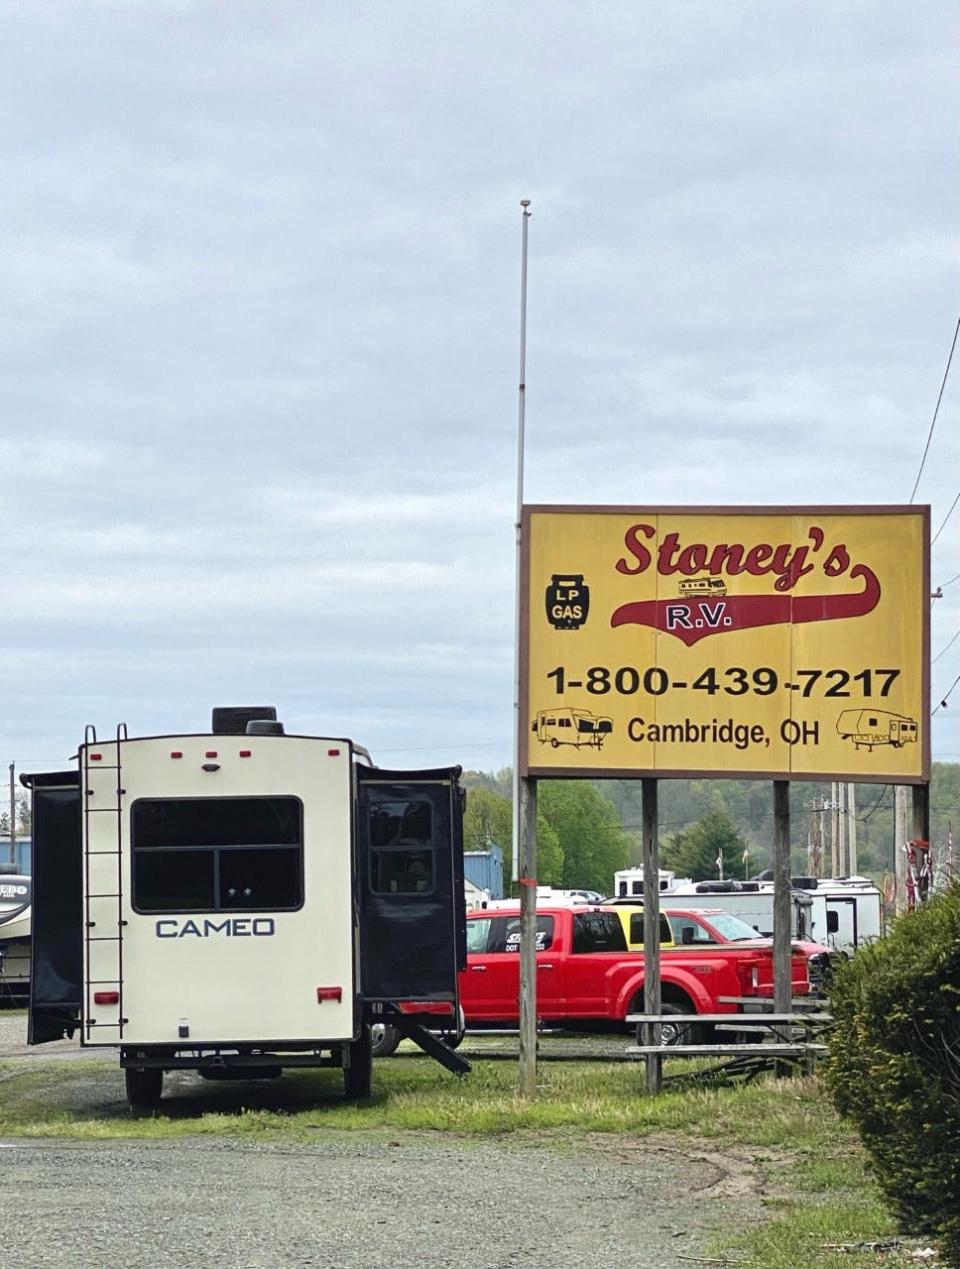 Stoney's RV sits just off of East Pike in Cambridge.